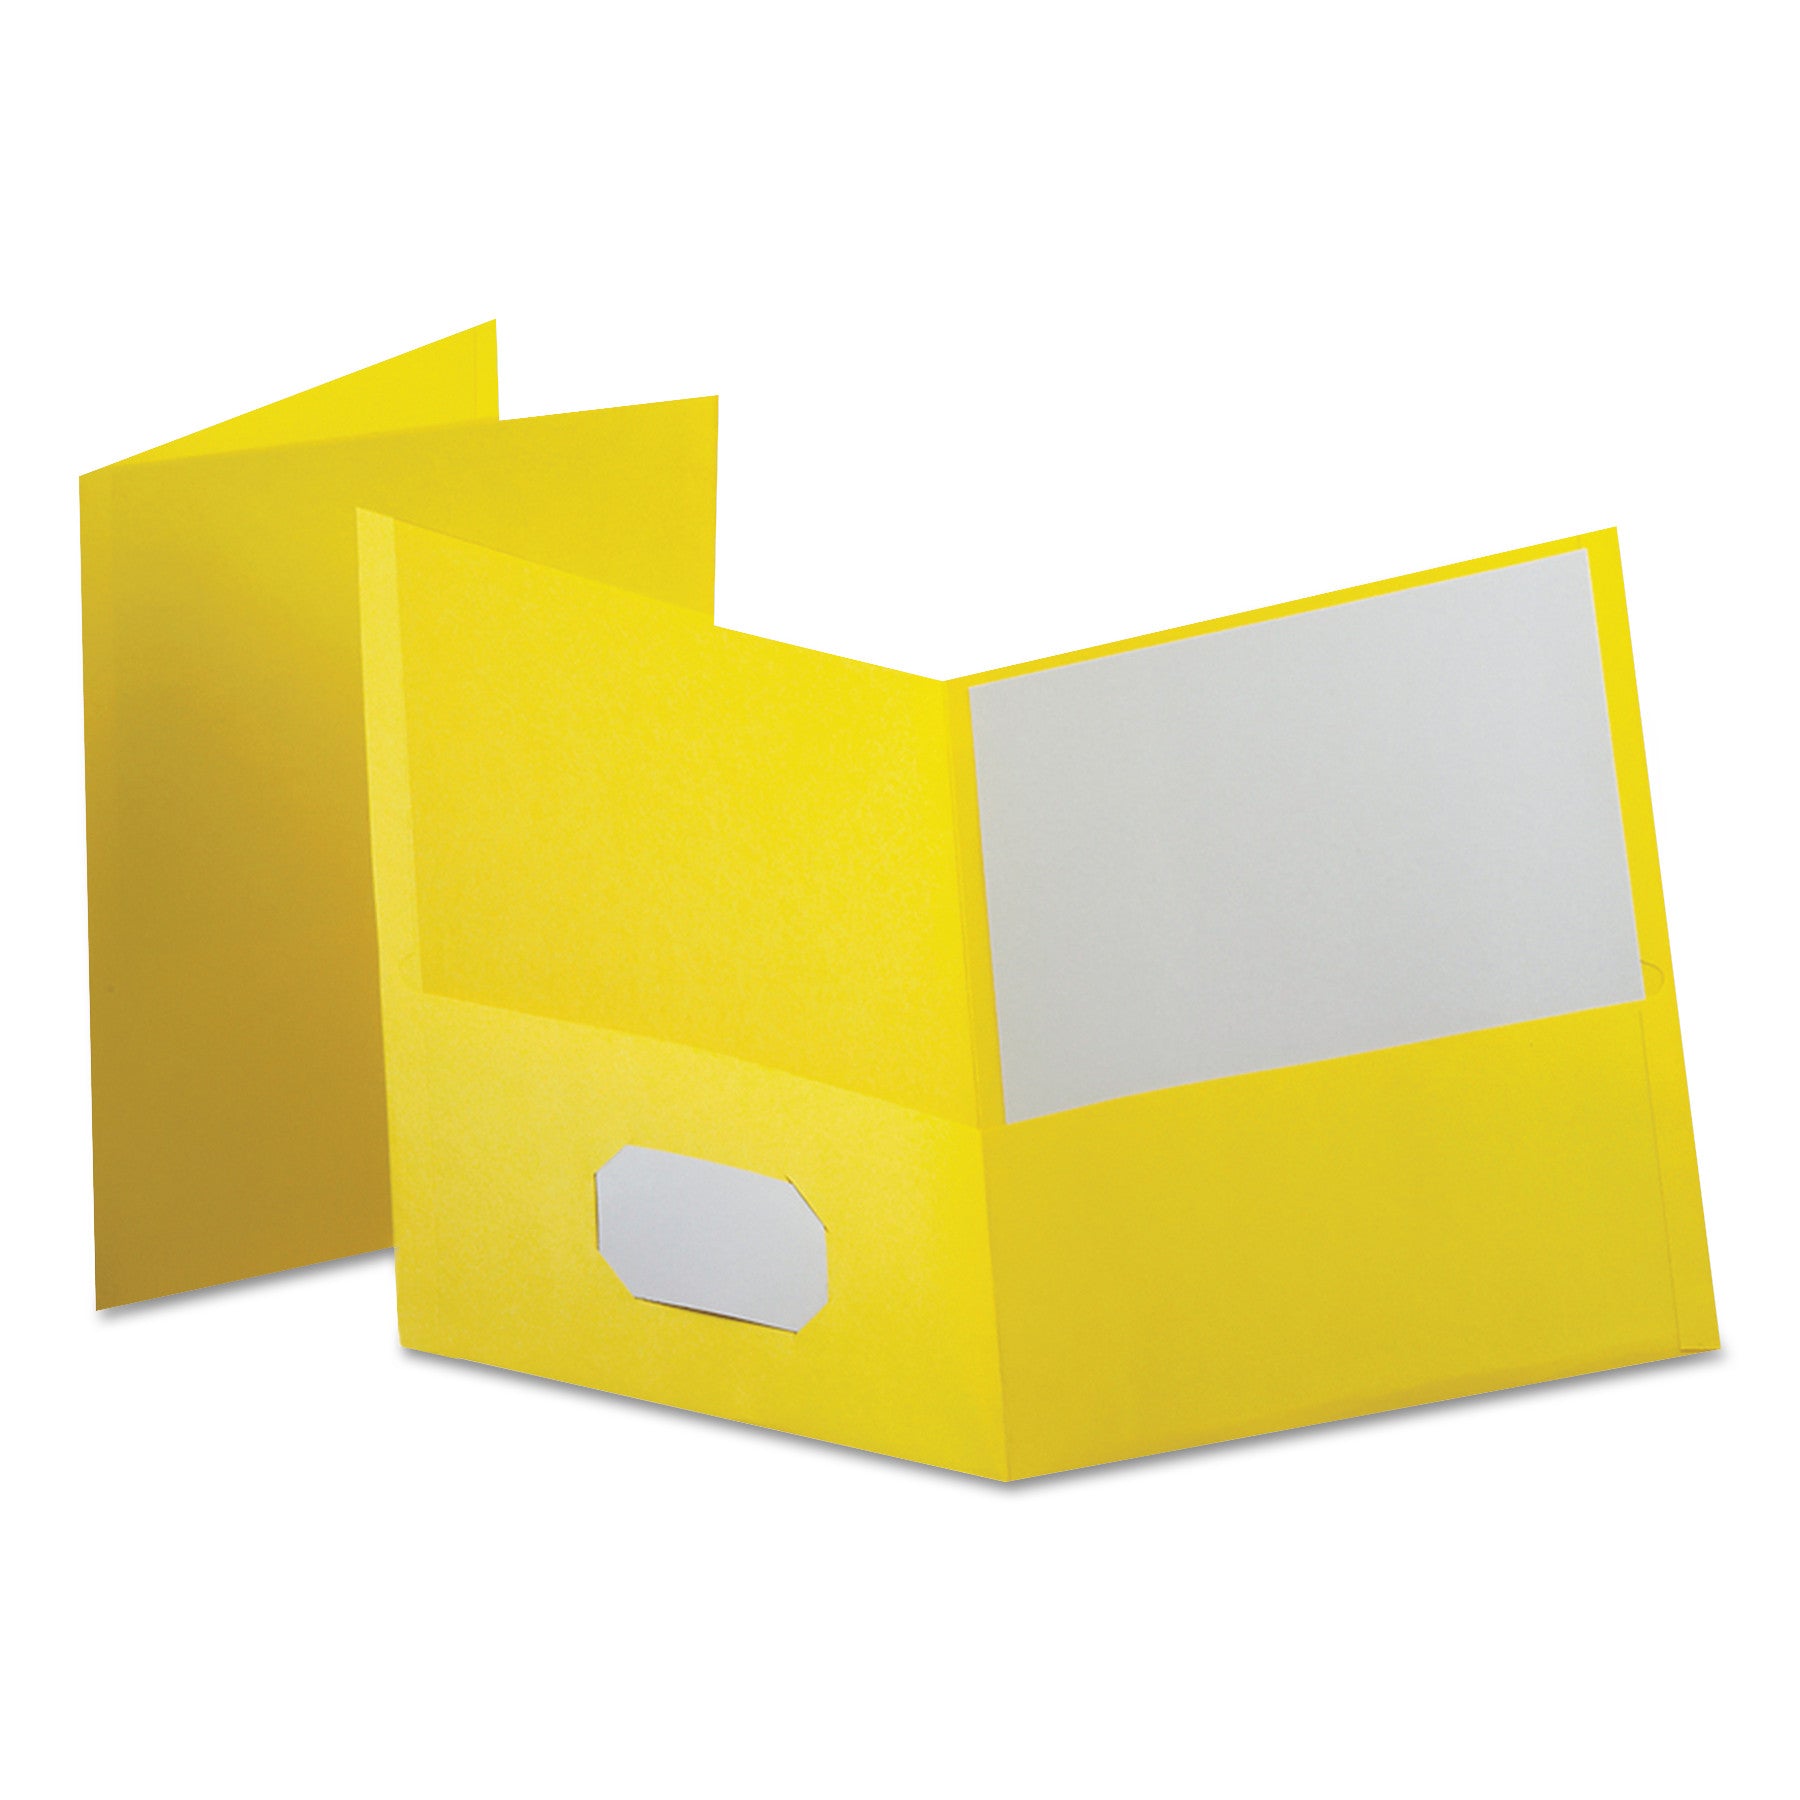 leatherette-two-pocket-portfolio-85-x-11-yellow-yellow-10-pack_oxf57579ee - 1